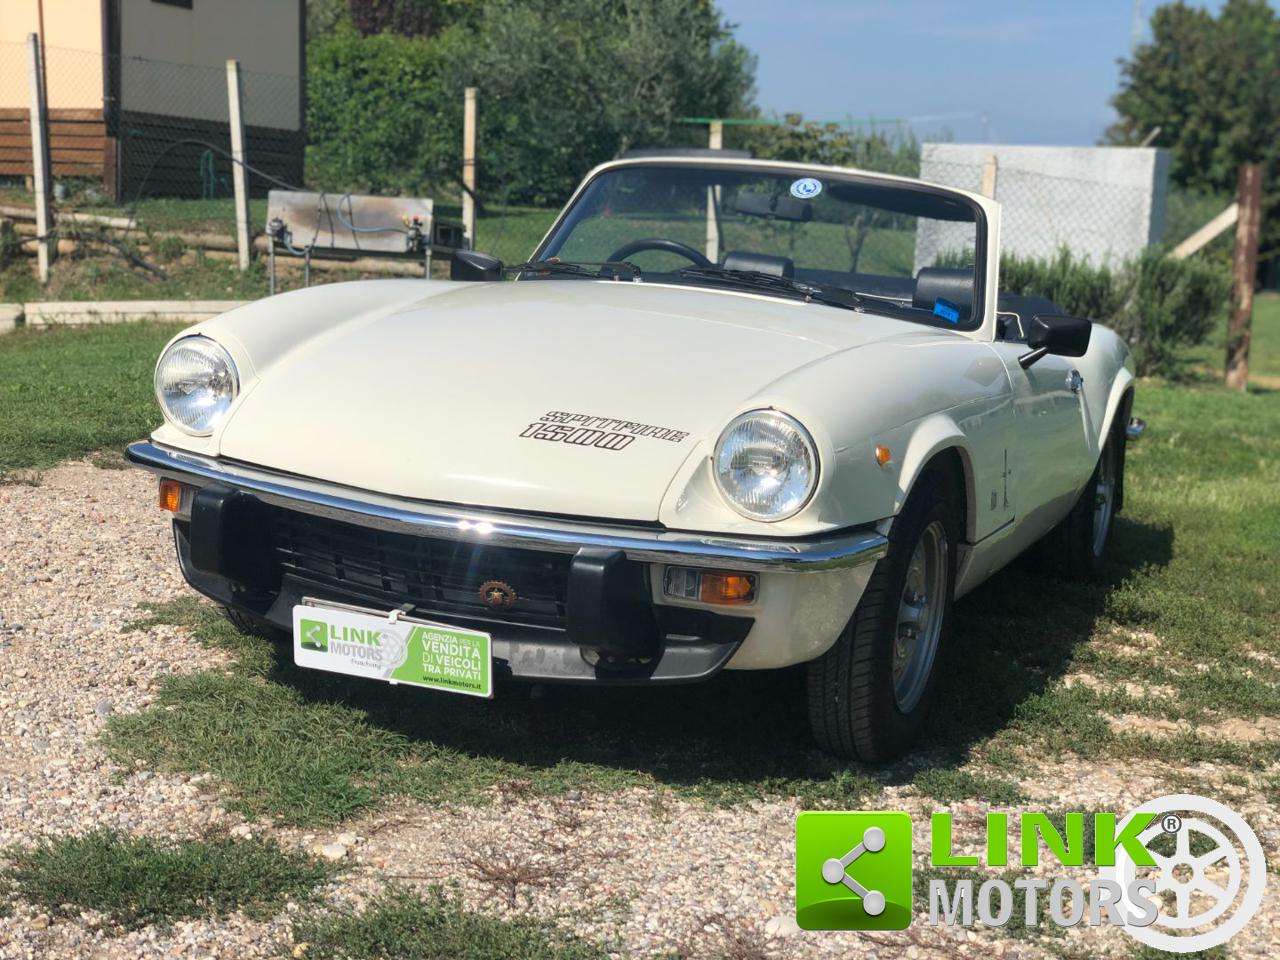 Triumph Spitfire Compact in Beige used in Verona - VR for € 14,500.-